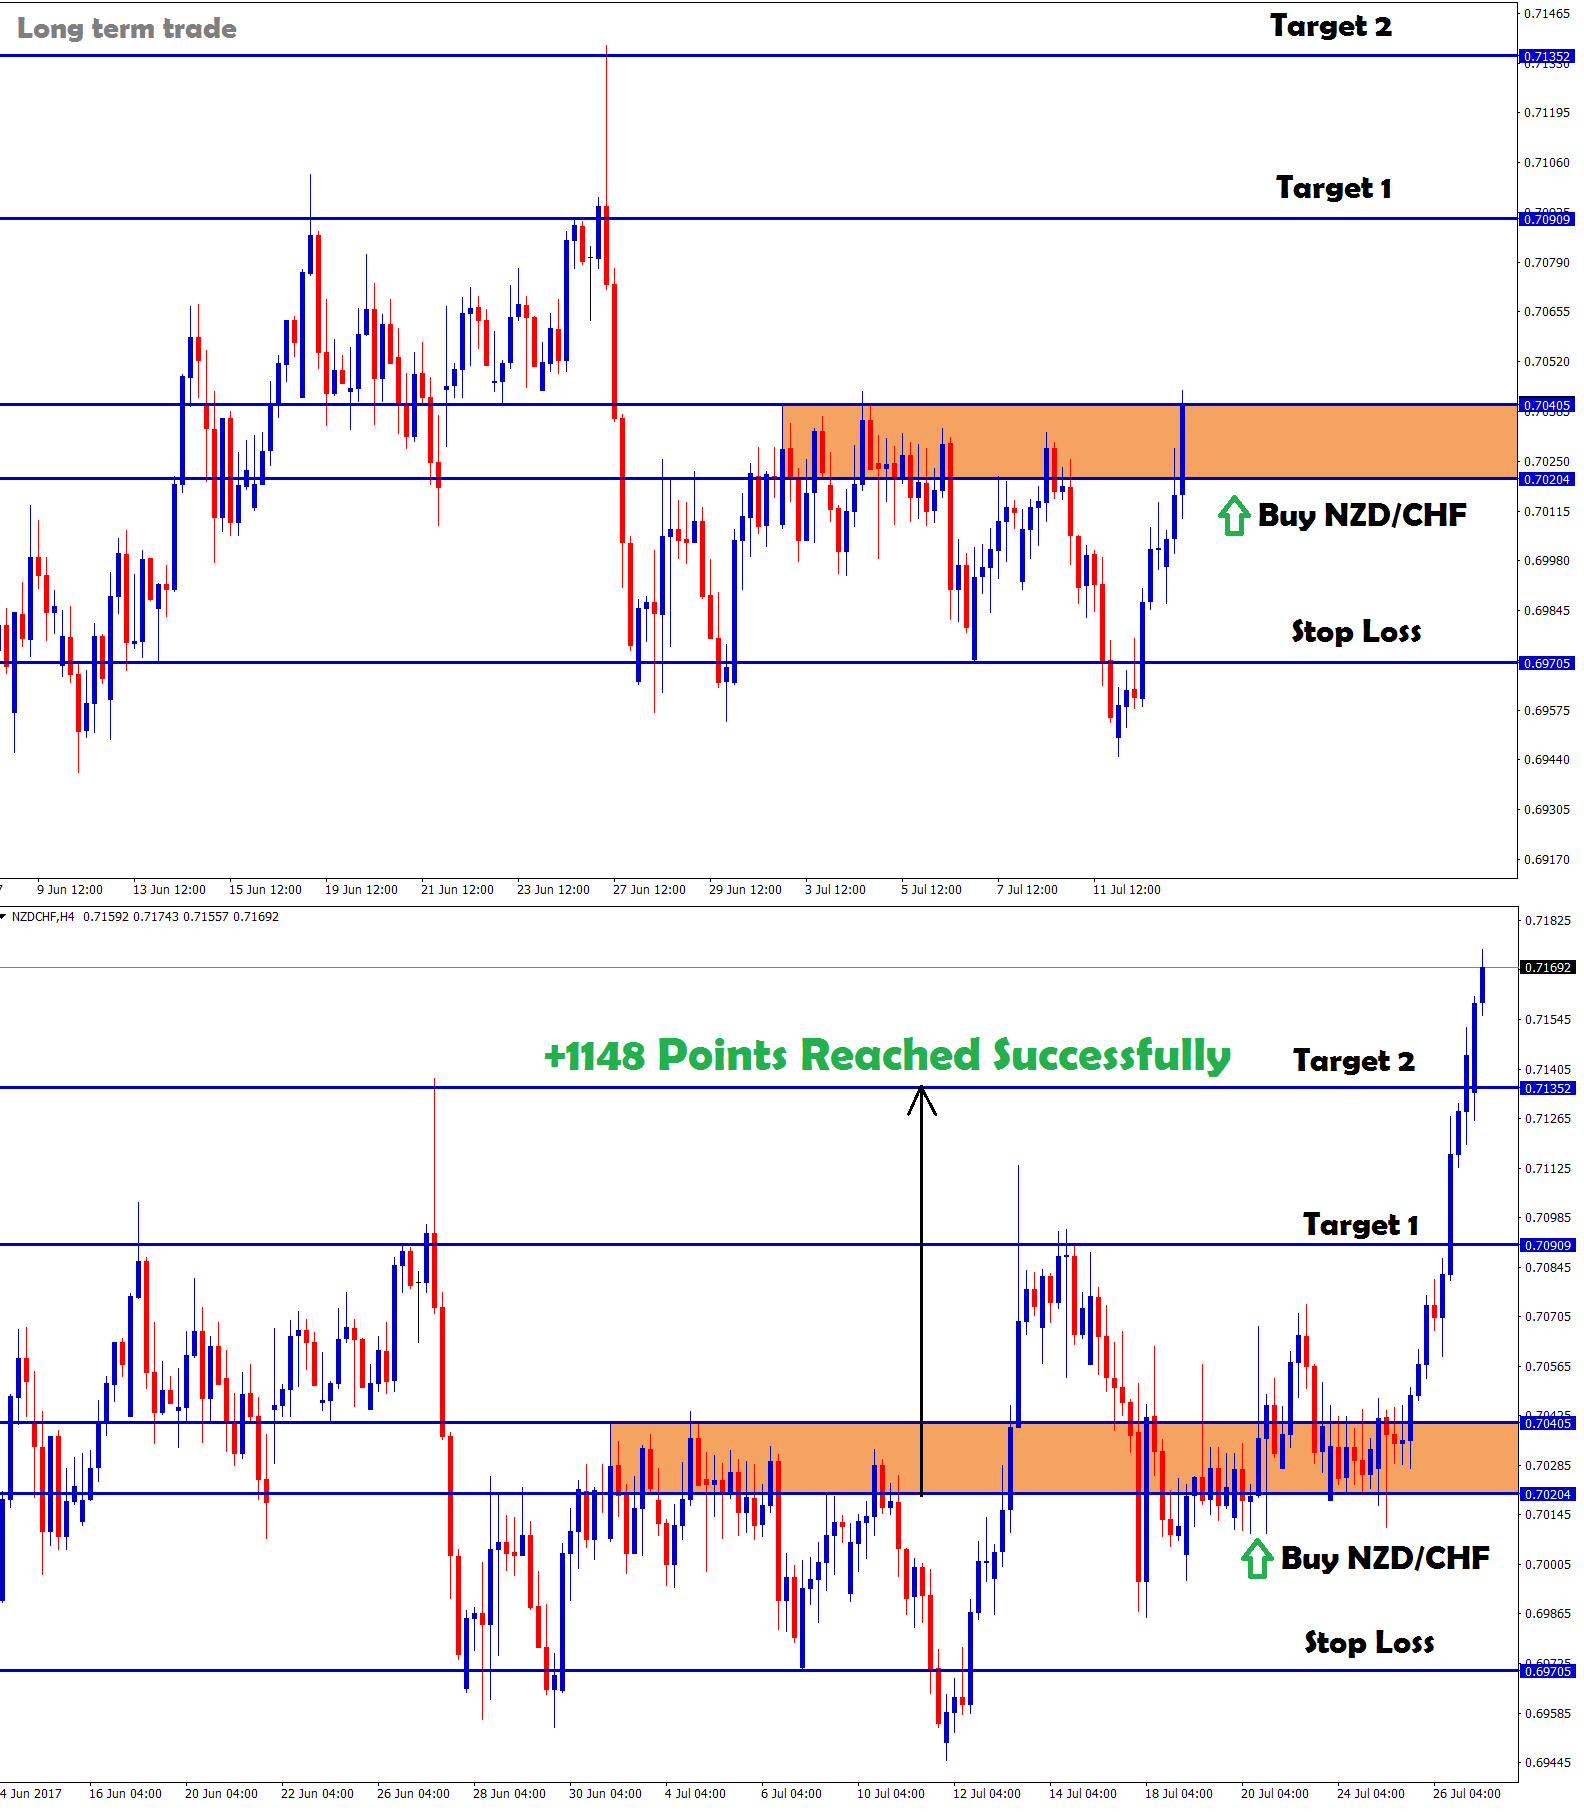 NZDCHF long term analysis reached 1148 points